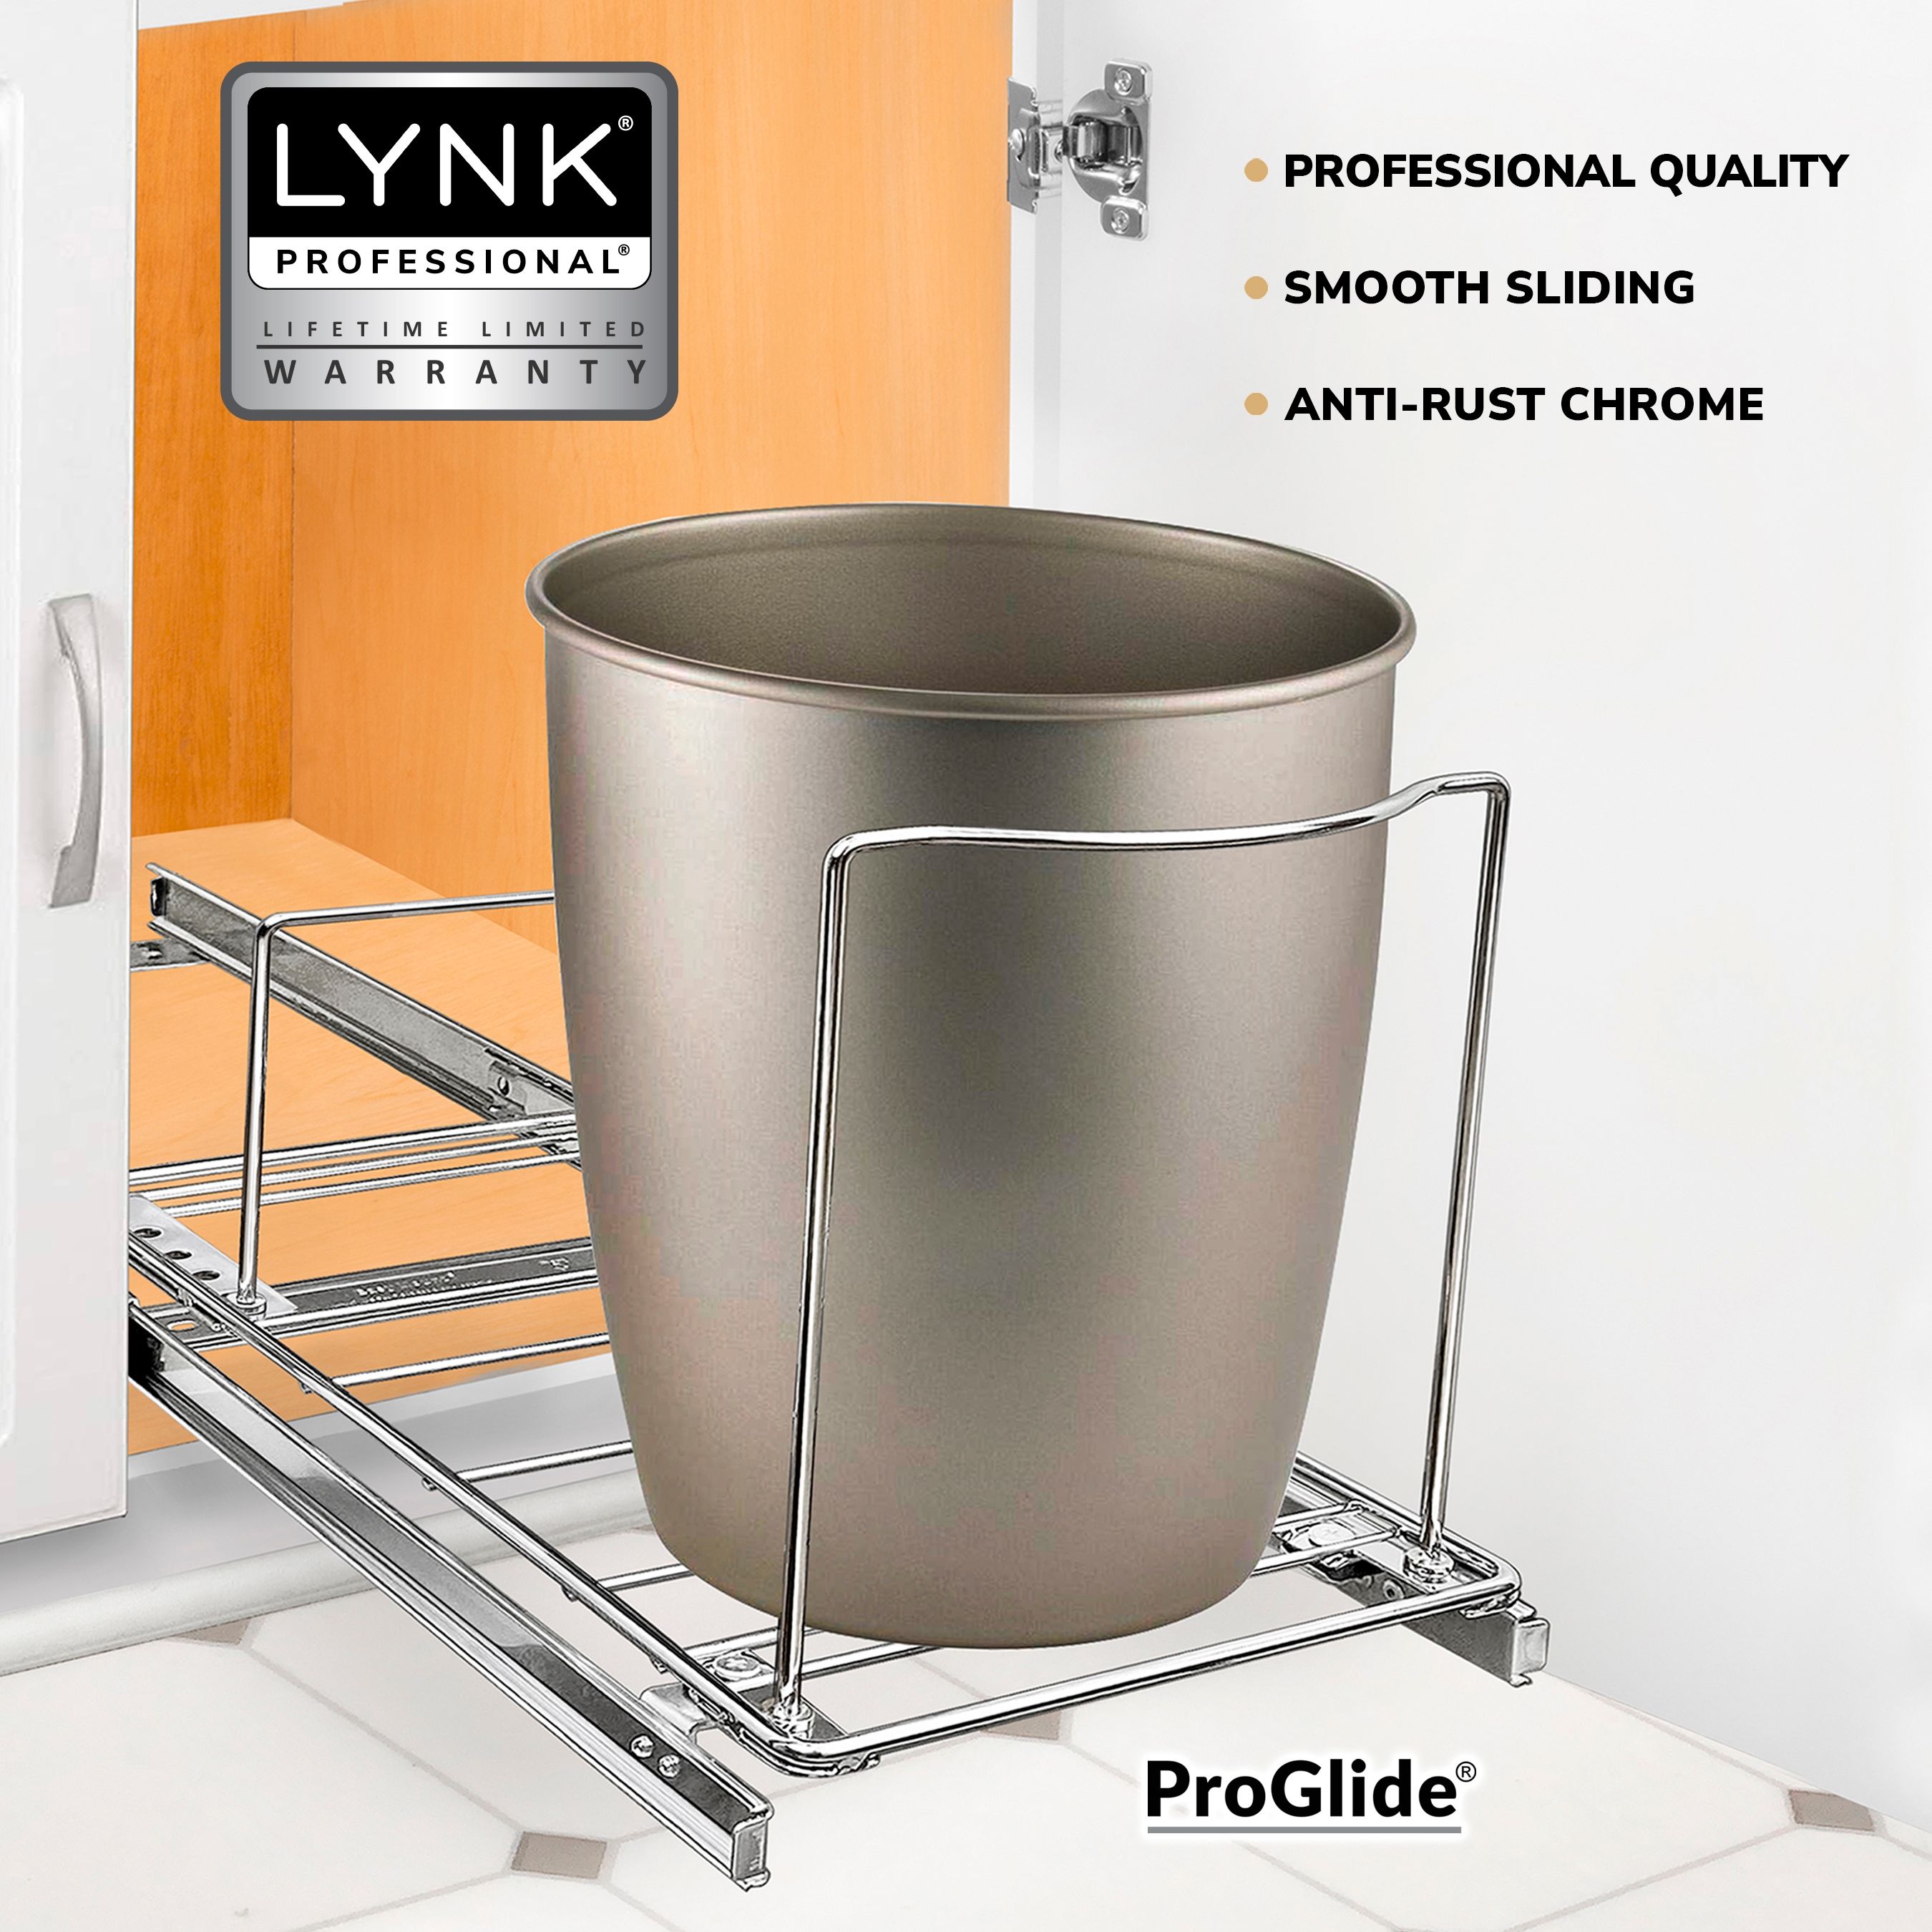 Lynk Professional Chrome Pull-Out Cabinet Organizer - 17 inch